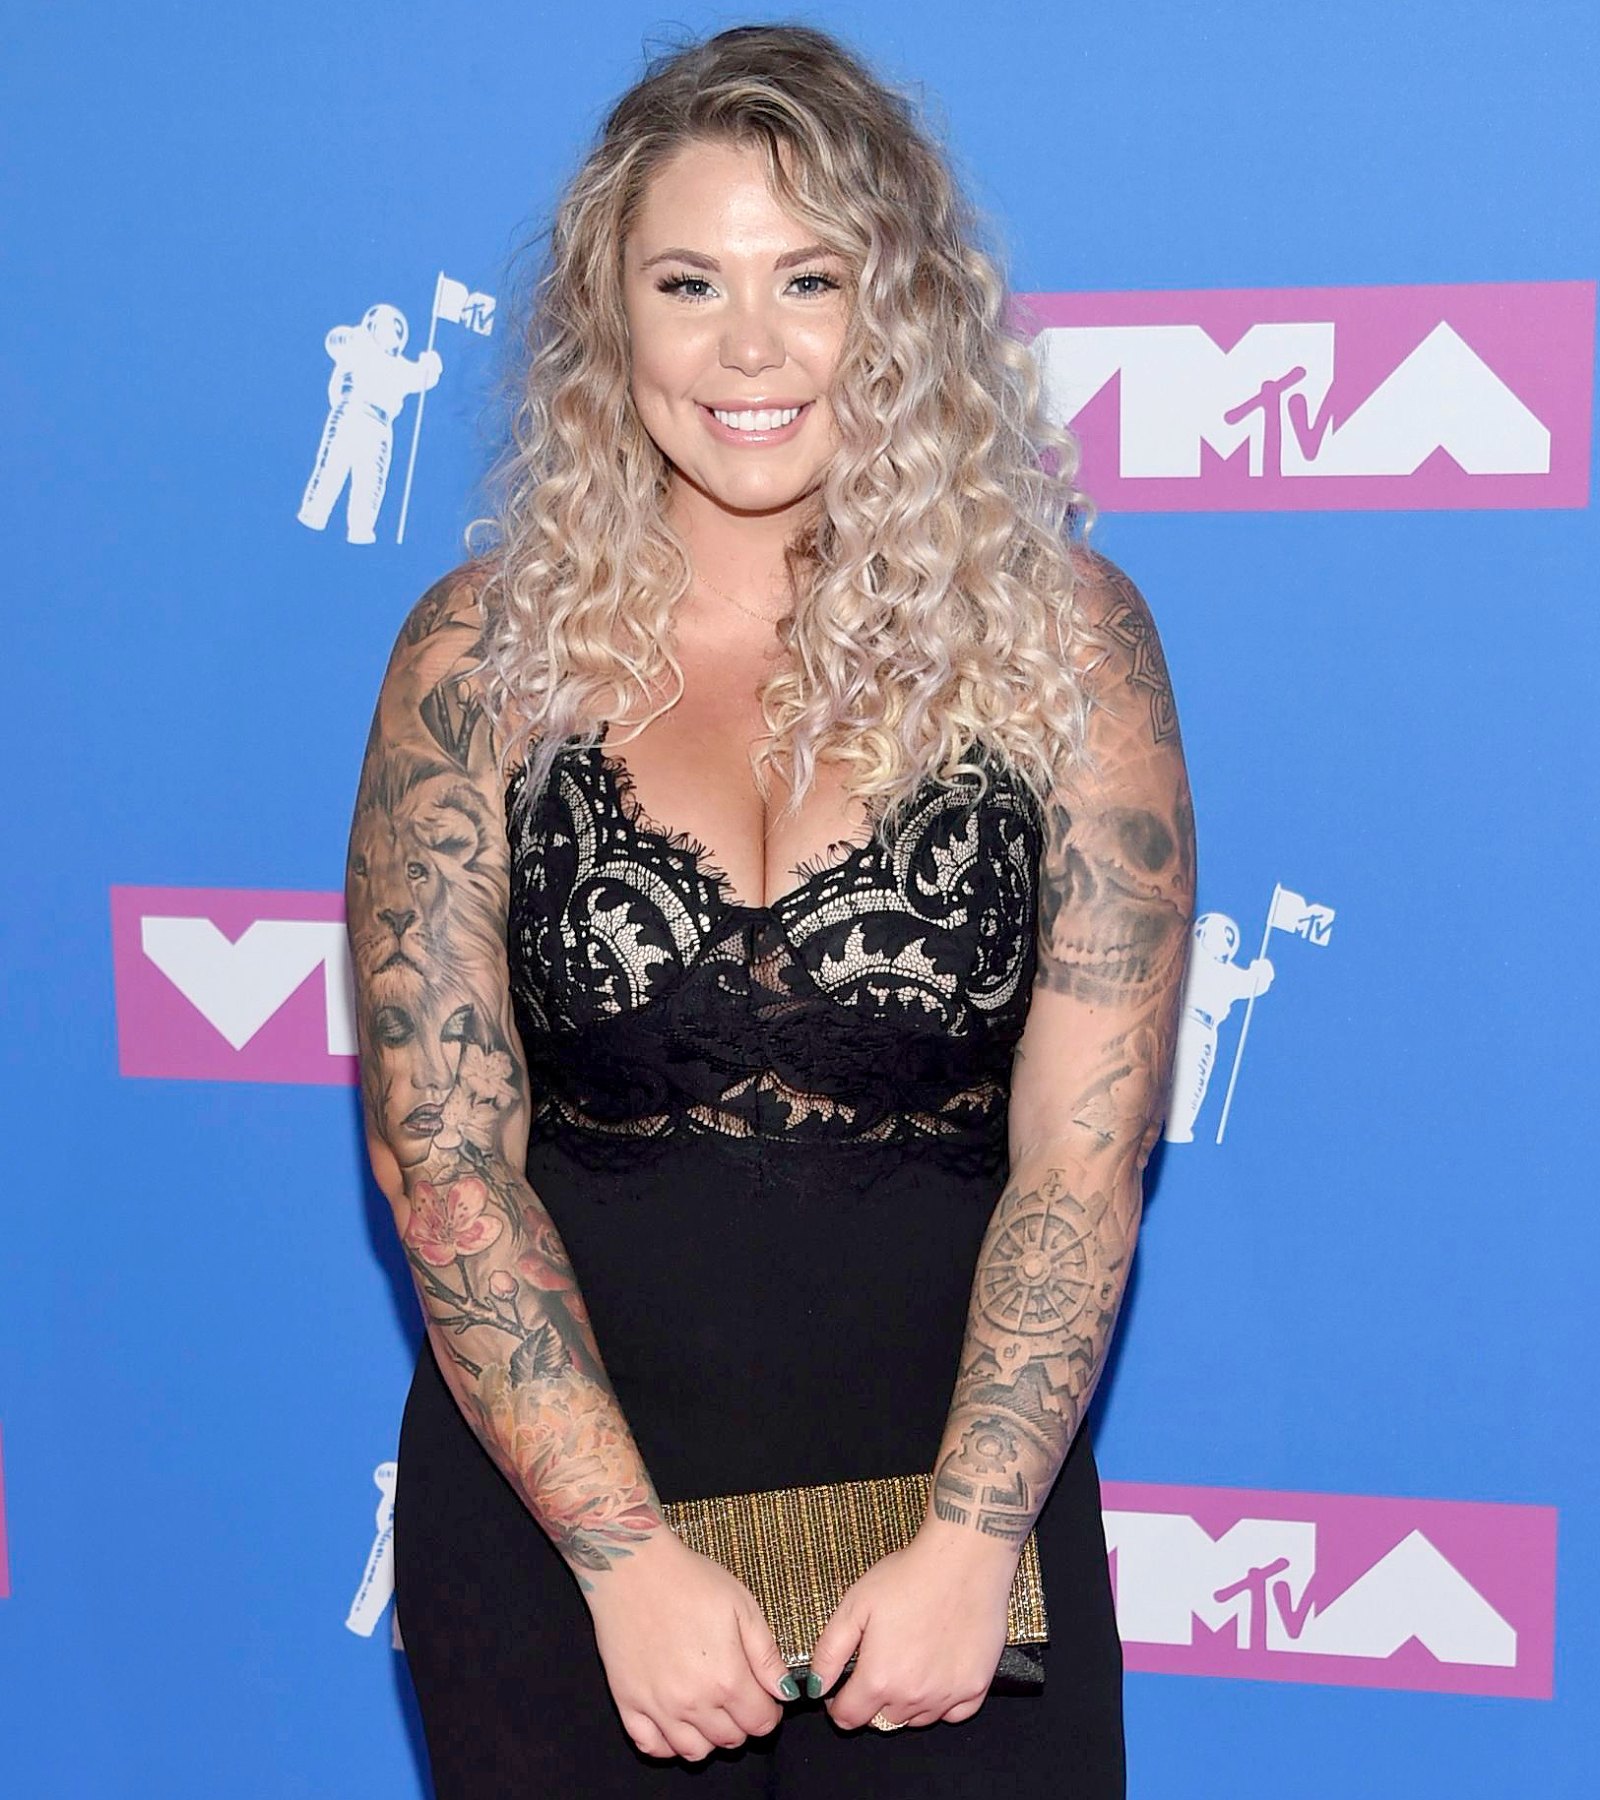 Kailyn Lowry Defends Postpartum Body 1 Month After Son’s Birth